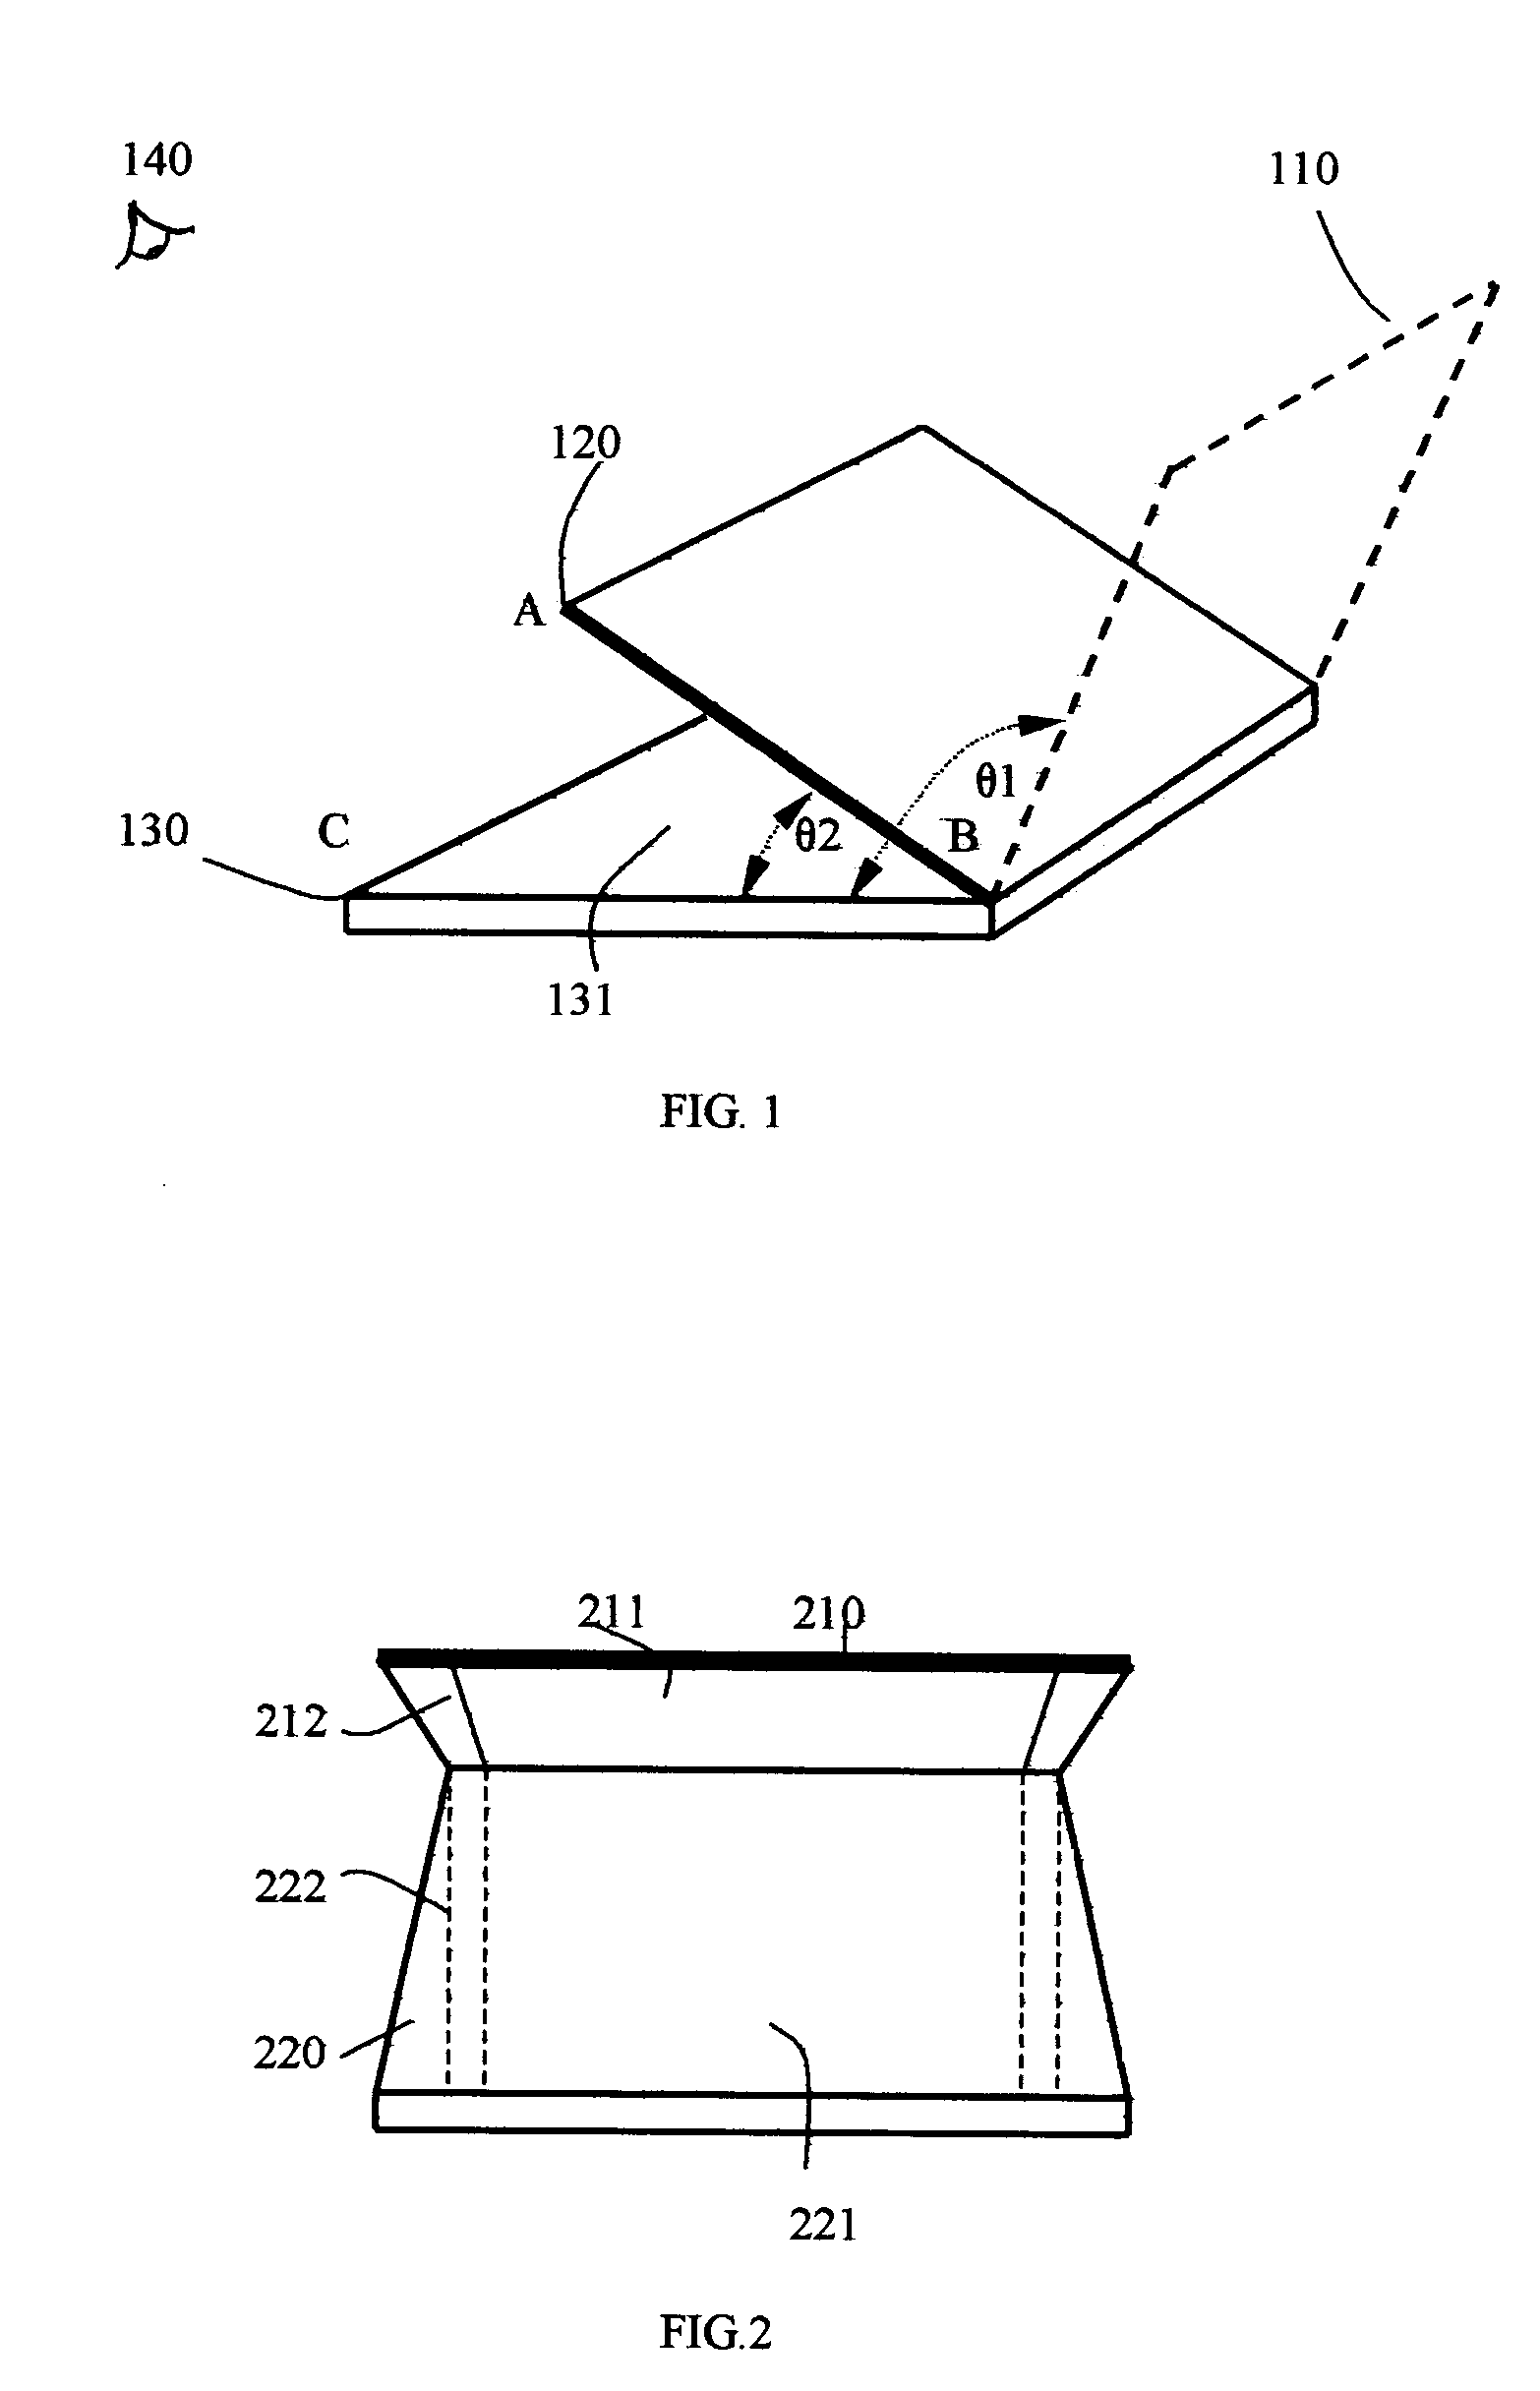 Sunlight readable direct-view and projection-view computing device